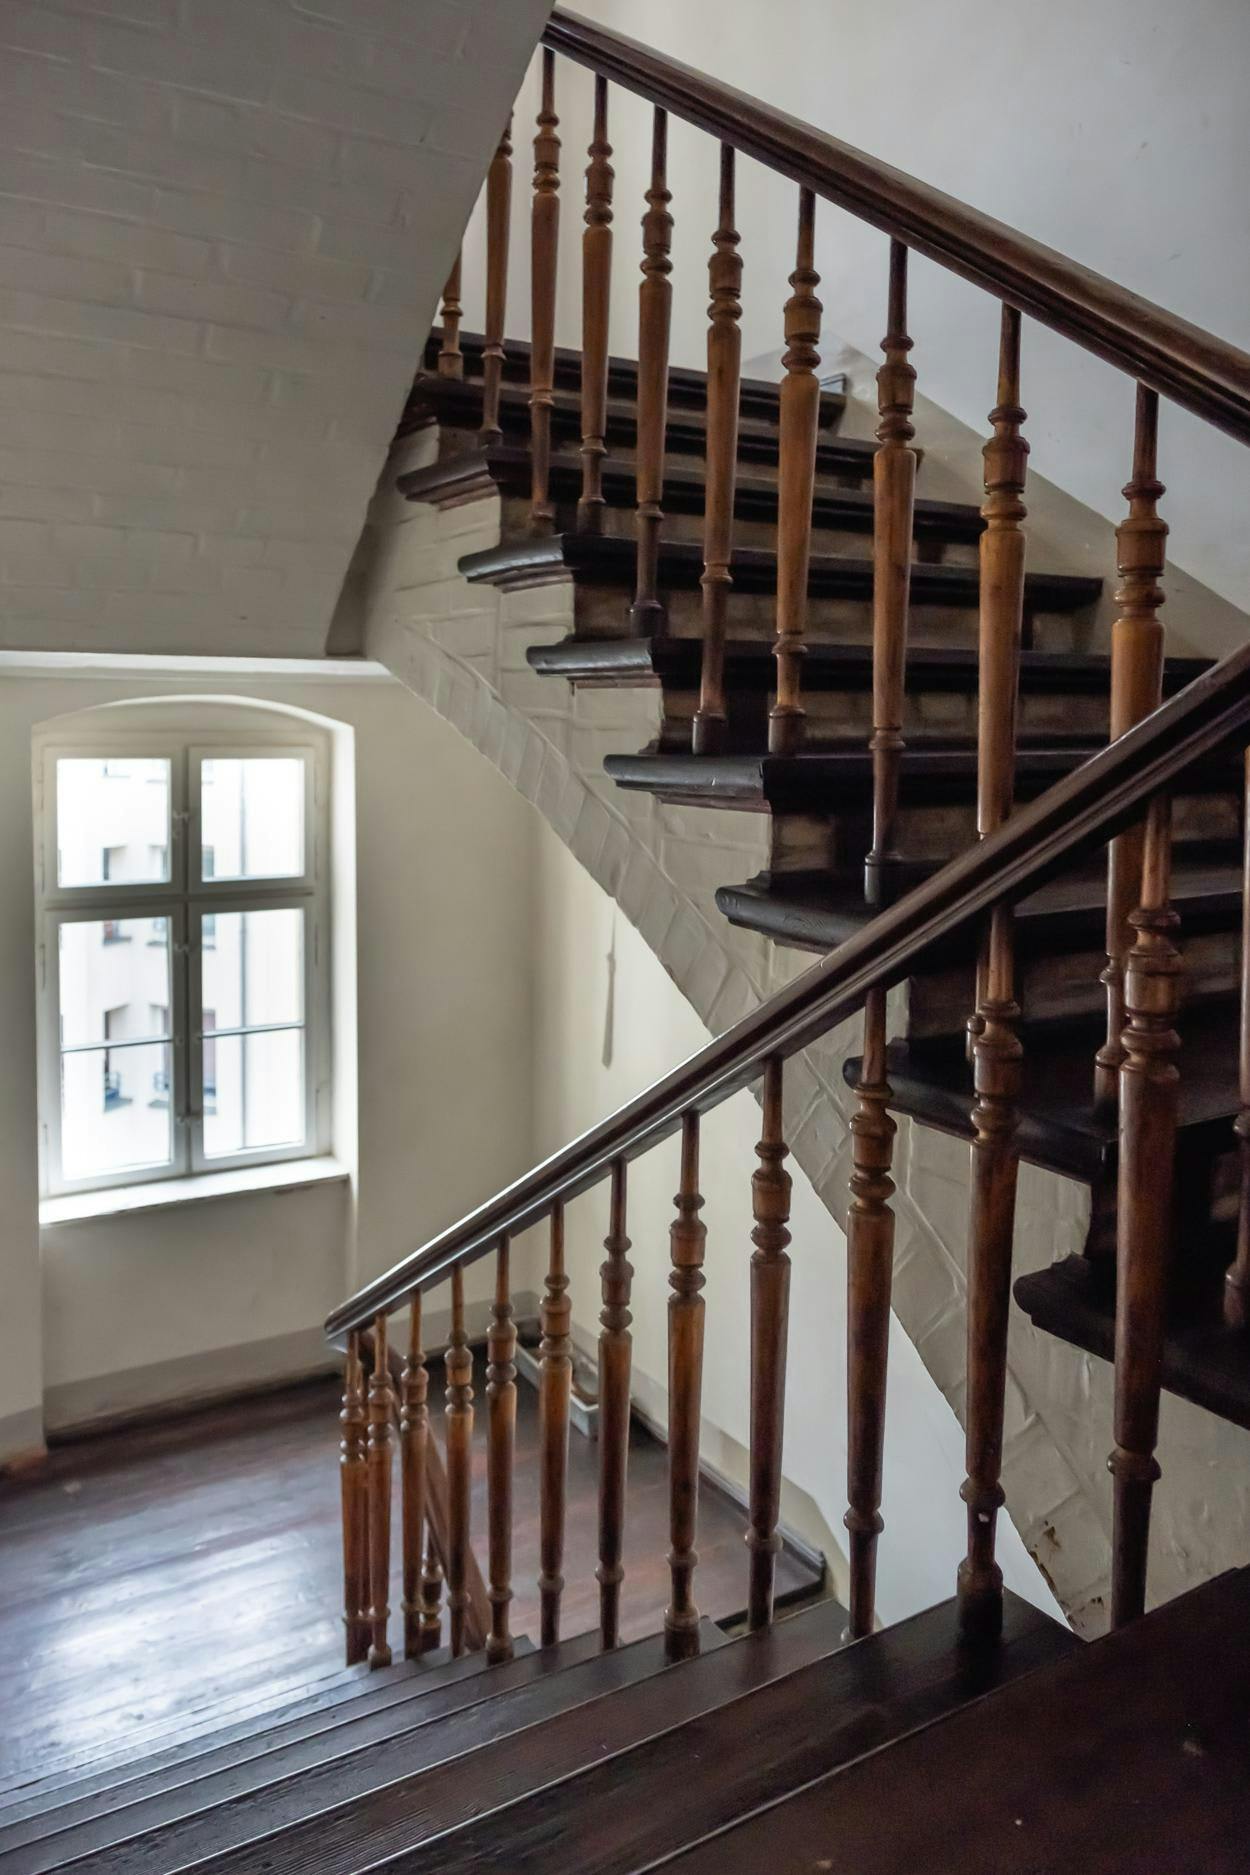 The image features a wooden staircase with a metal railing, located in a house with a window.